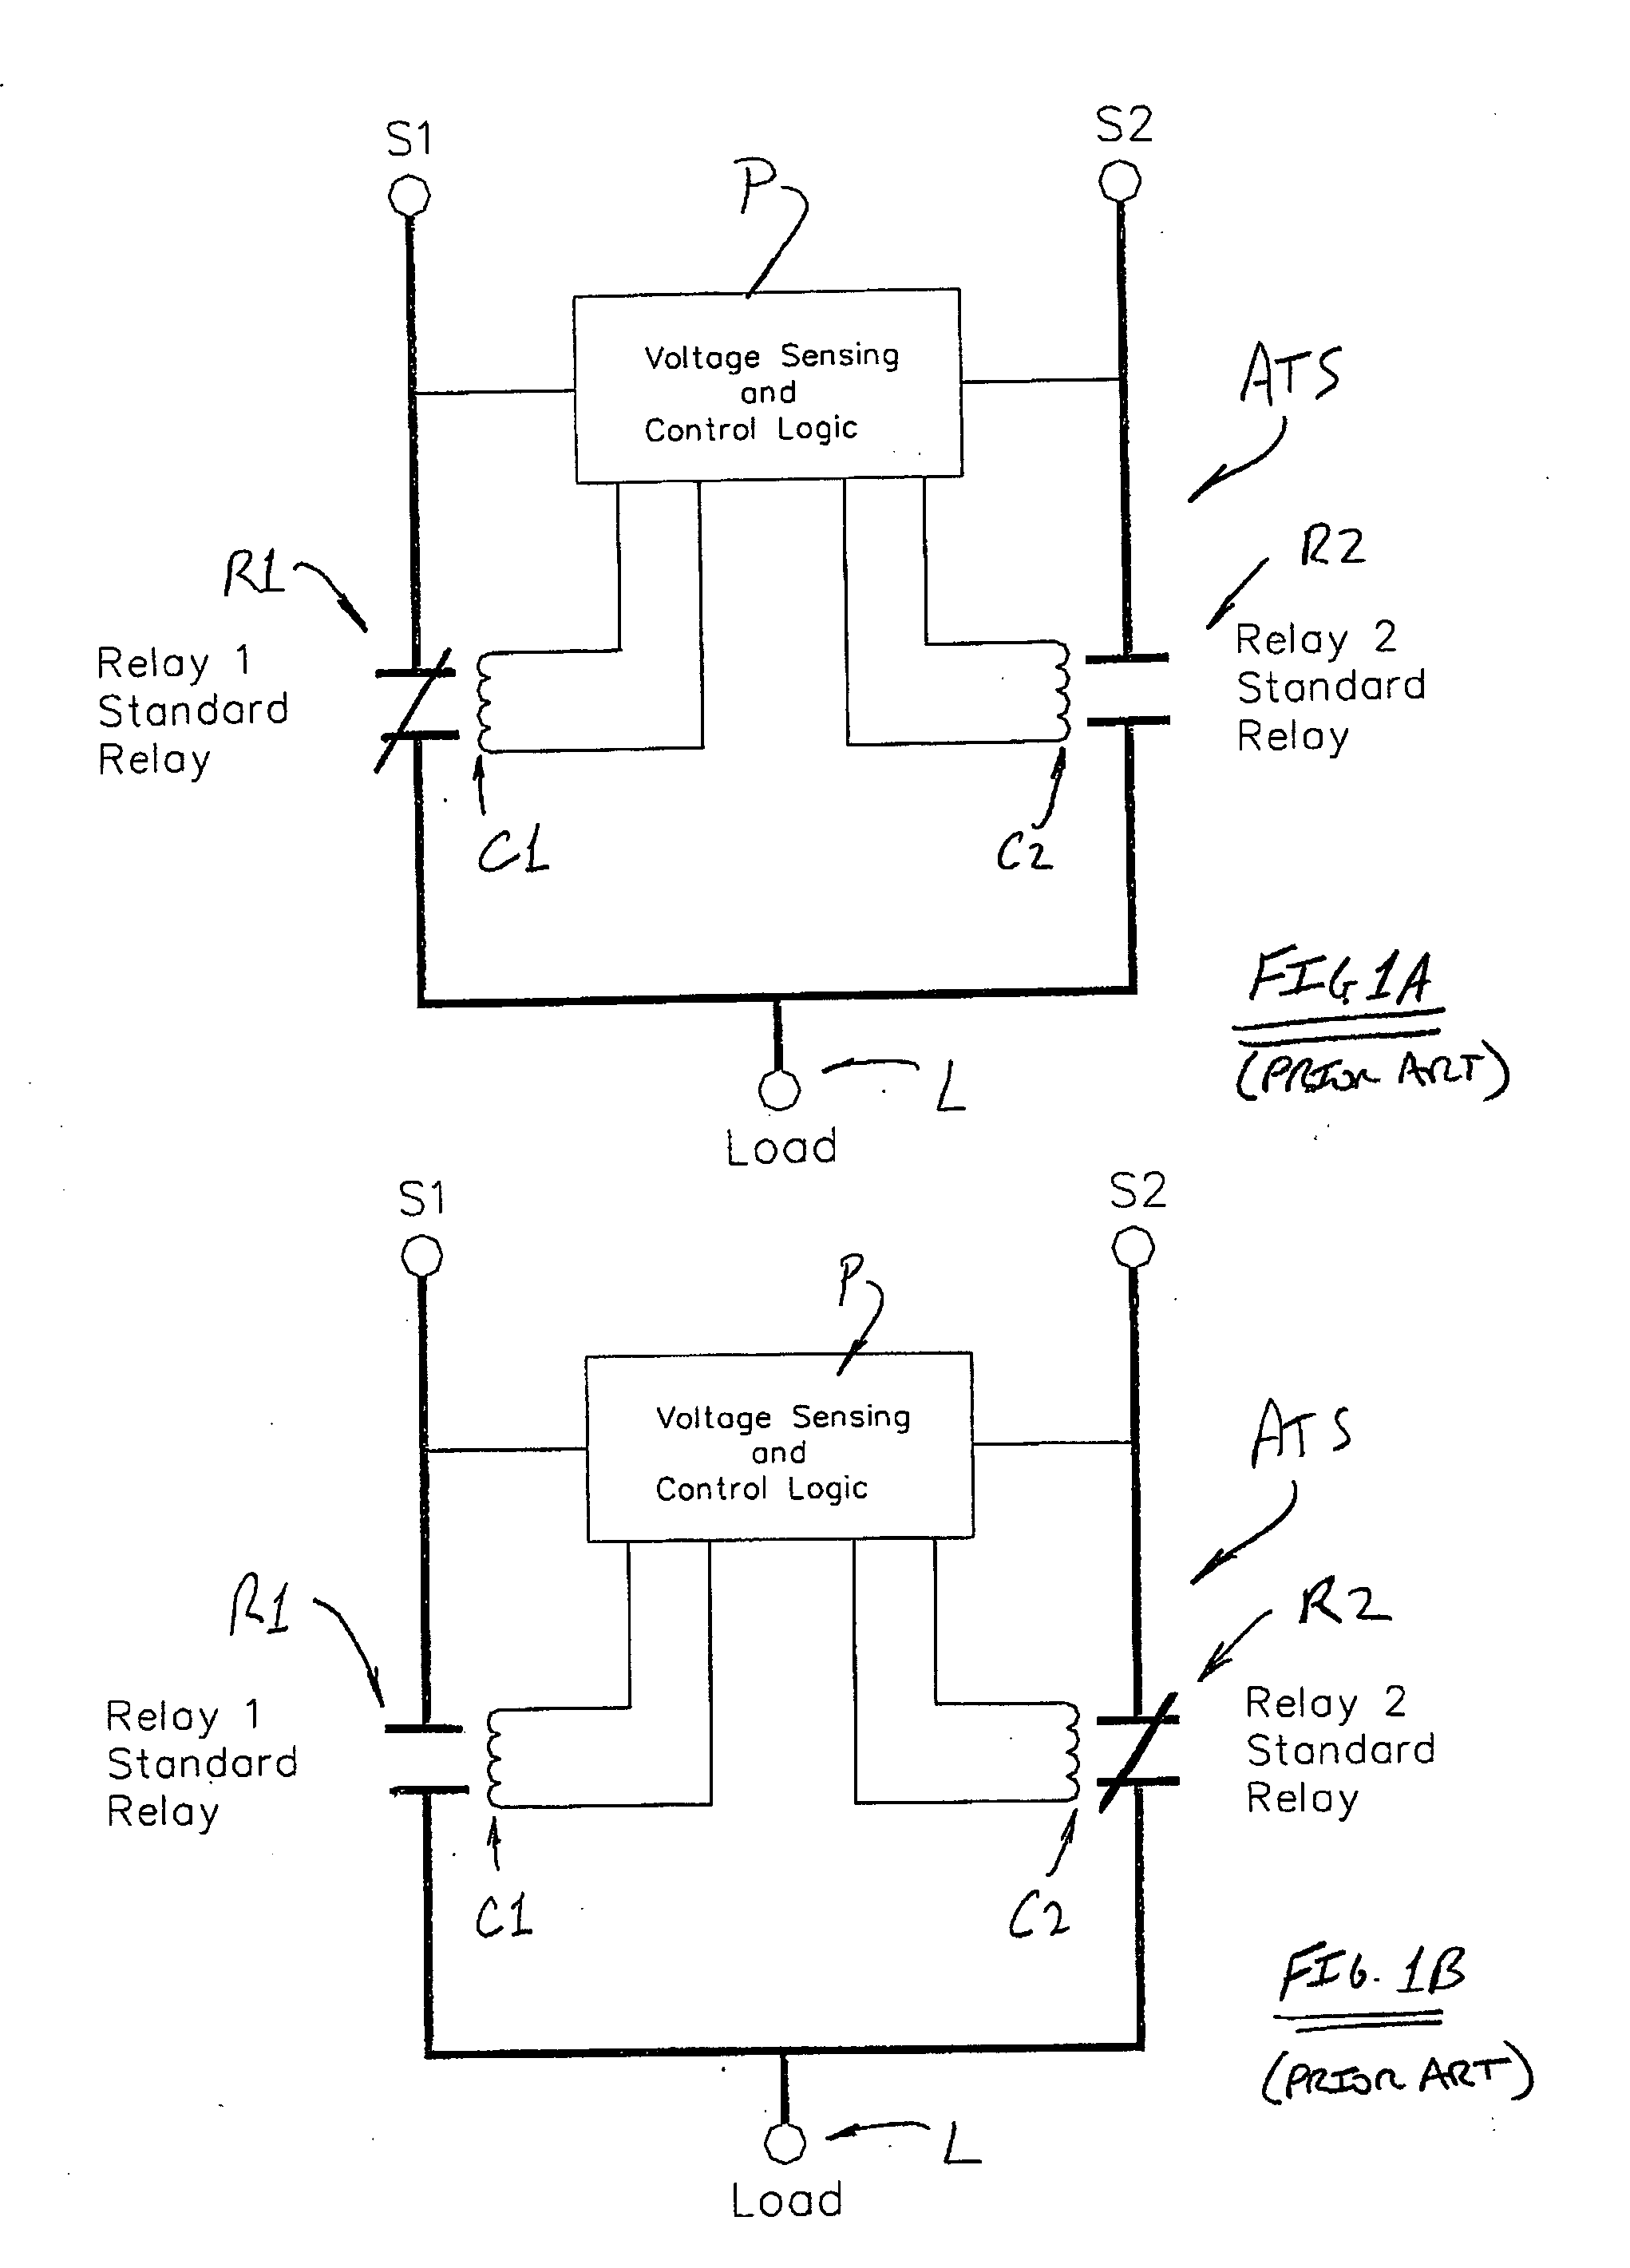 Method and apparatus for transfer of a critical load from one source to a back up source using magnetically latched relays